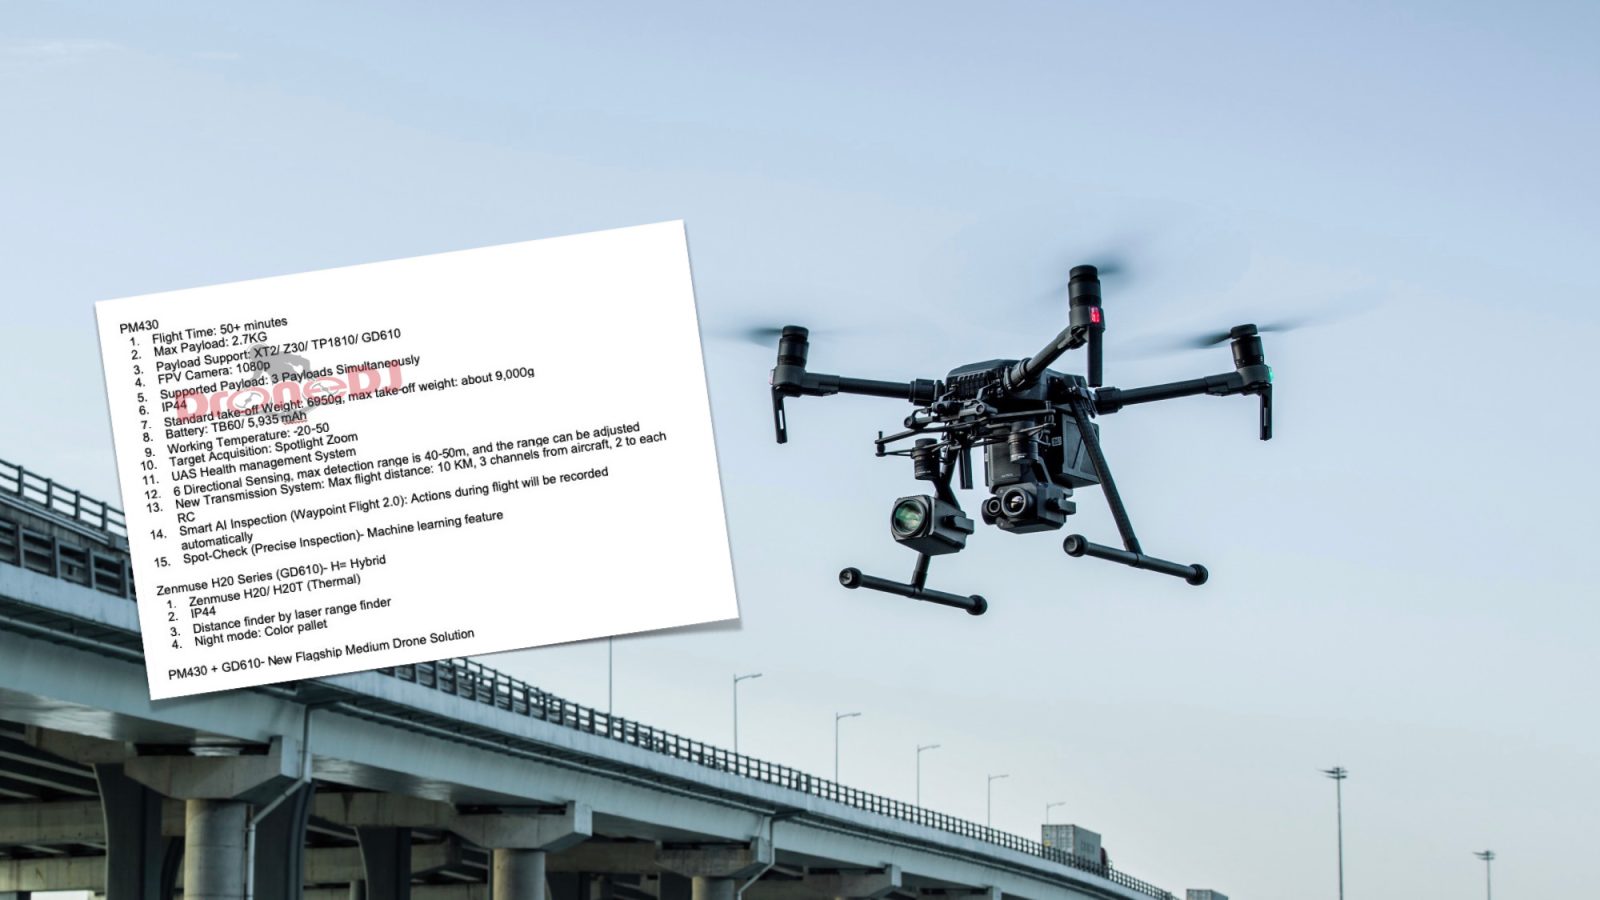 DJI Matrice 300 (M300) specifications and Zenmuse H20 hybrid thermal camera